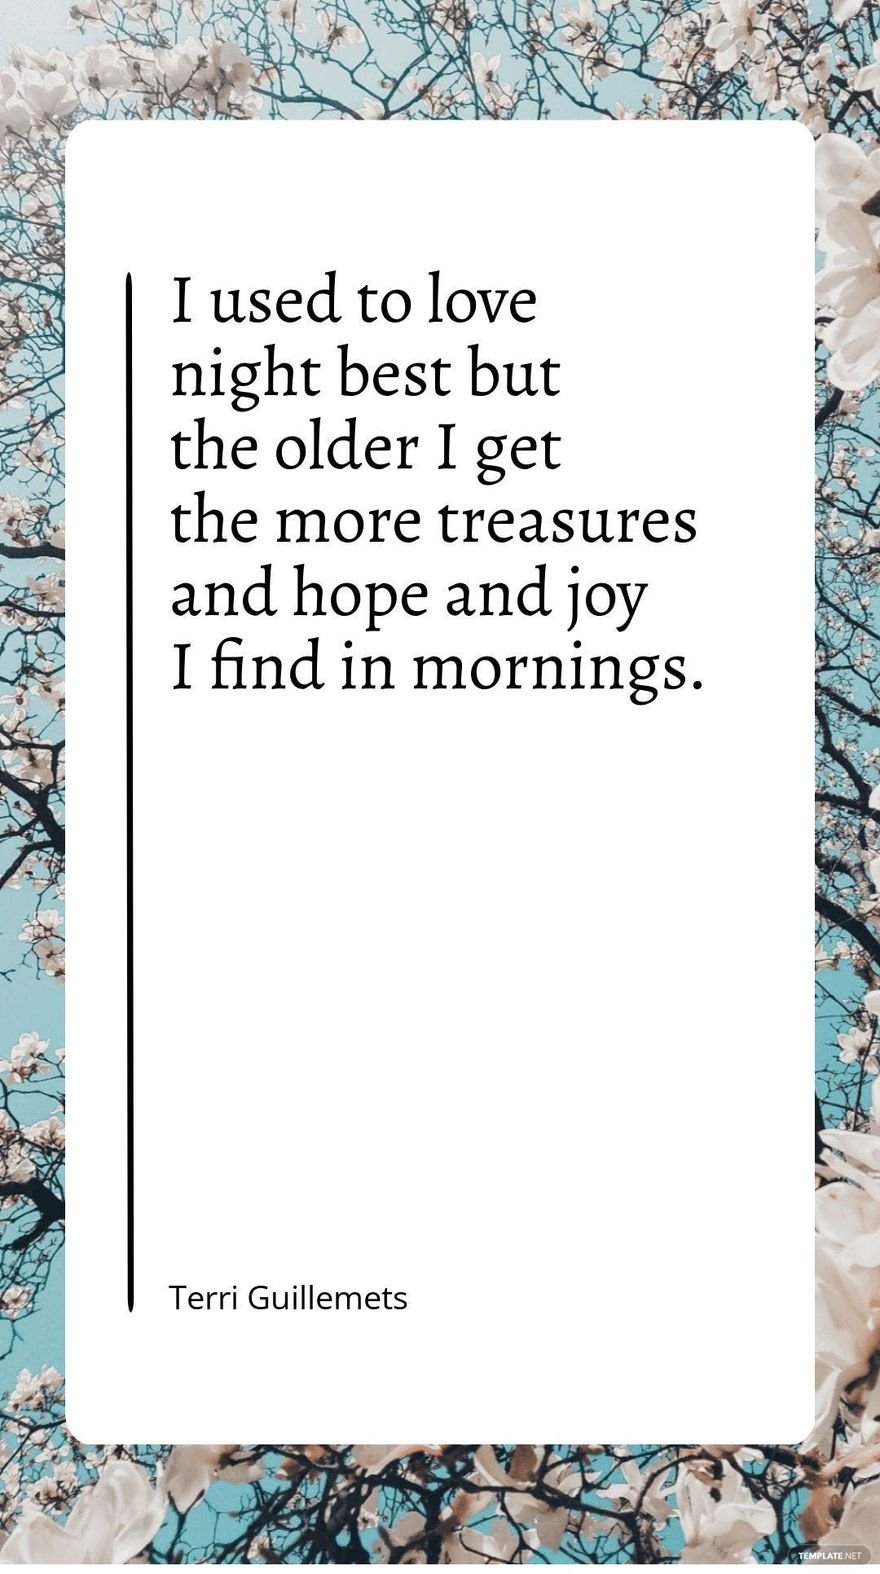 Terri Guillemets - I used to love night best but the older I get the more treasures and hope and joy I find in mornings.